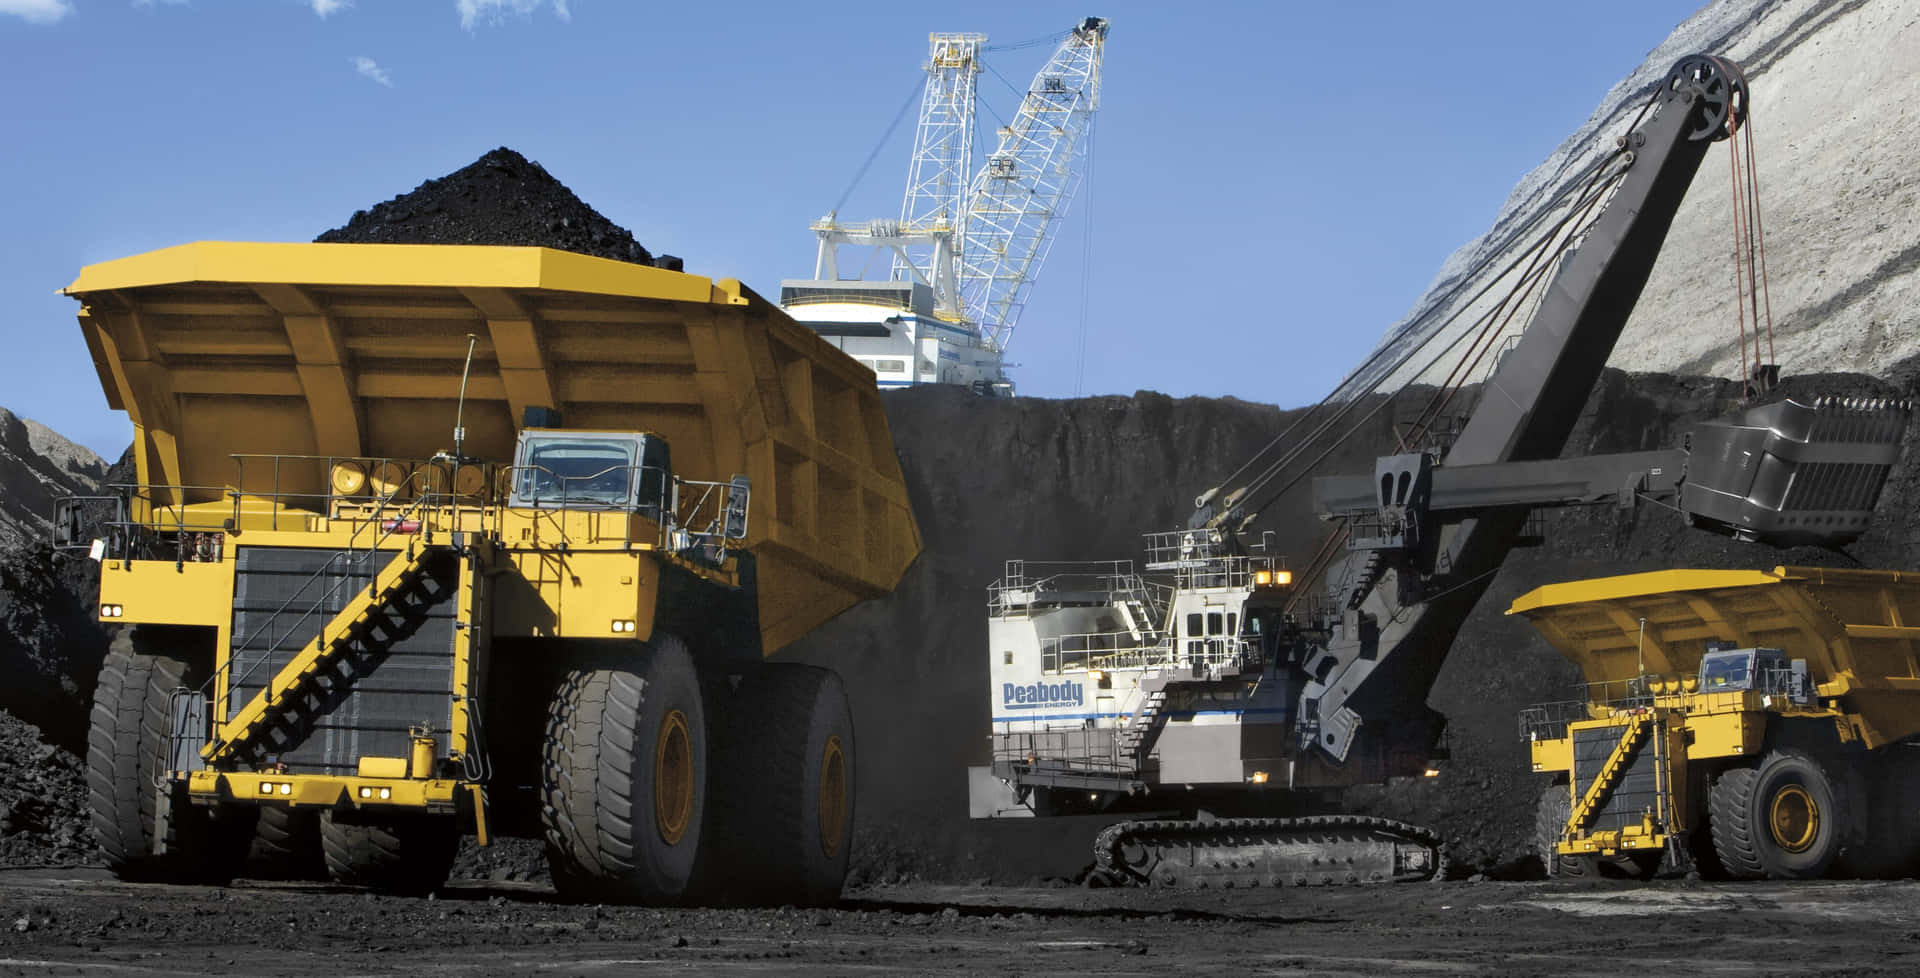 A Group Of Trucks And A Crane In Front Of A Coal Field